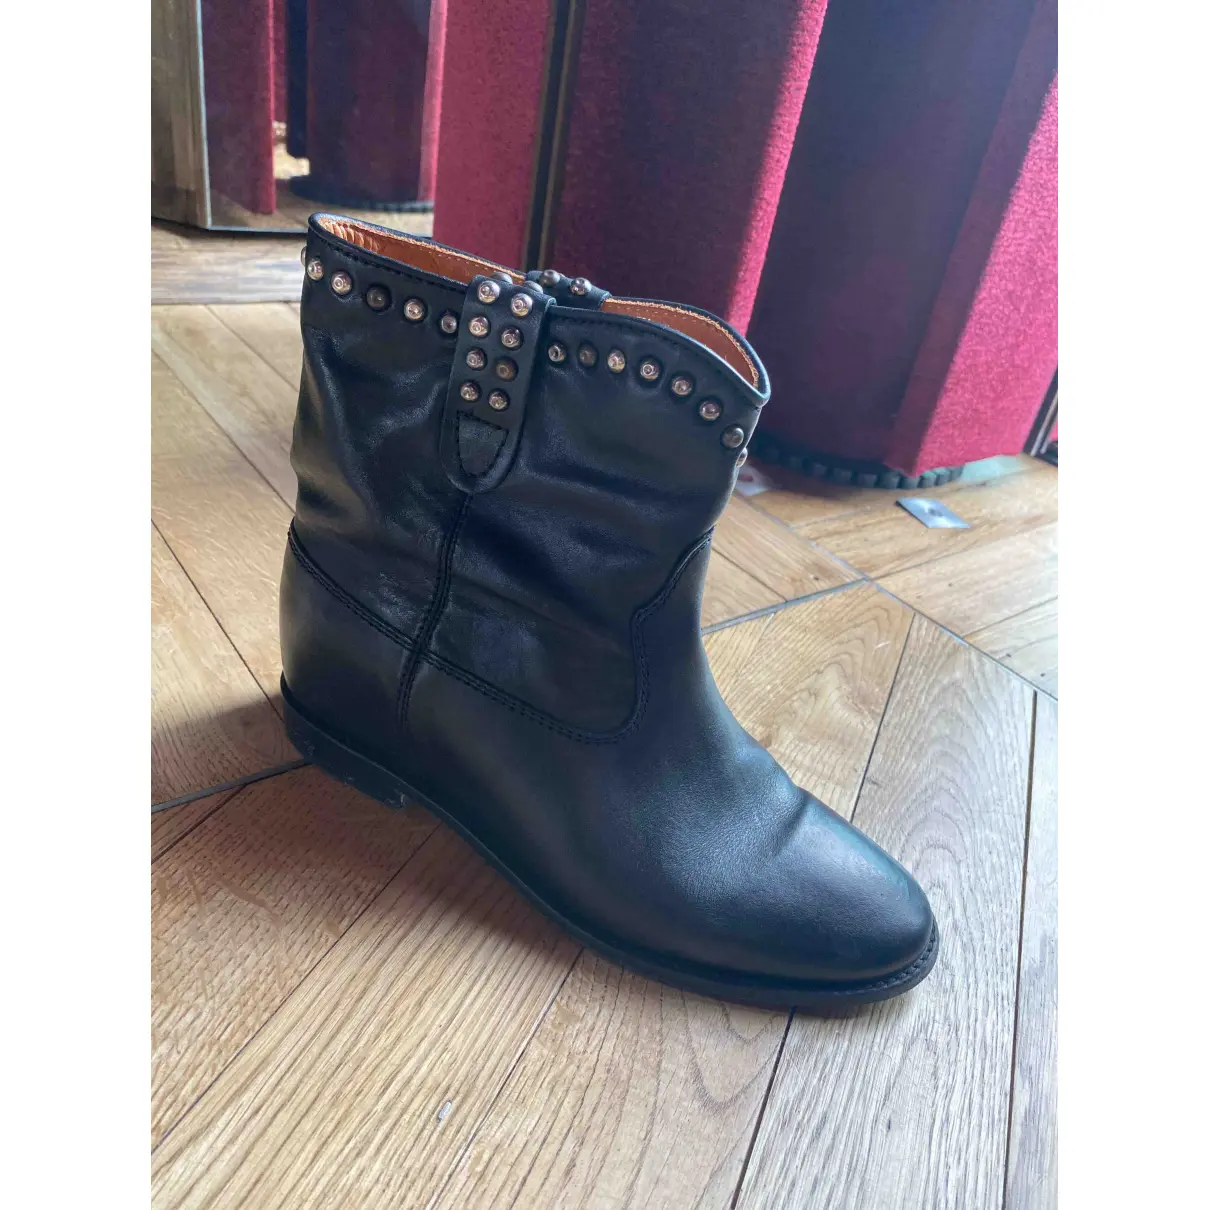 Buy Isabel Marant Crisi  leather ankle boots online